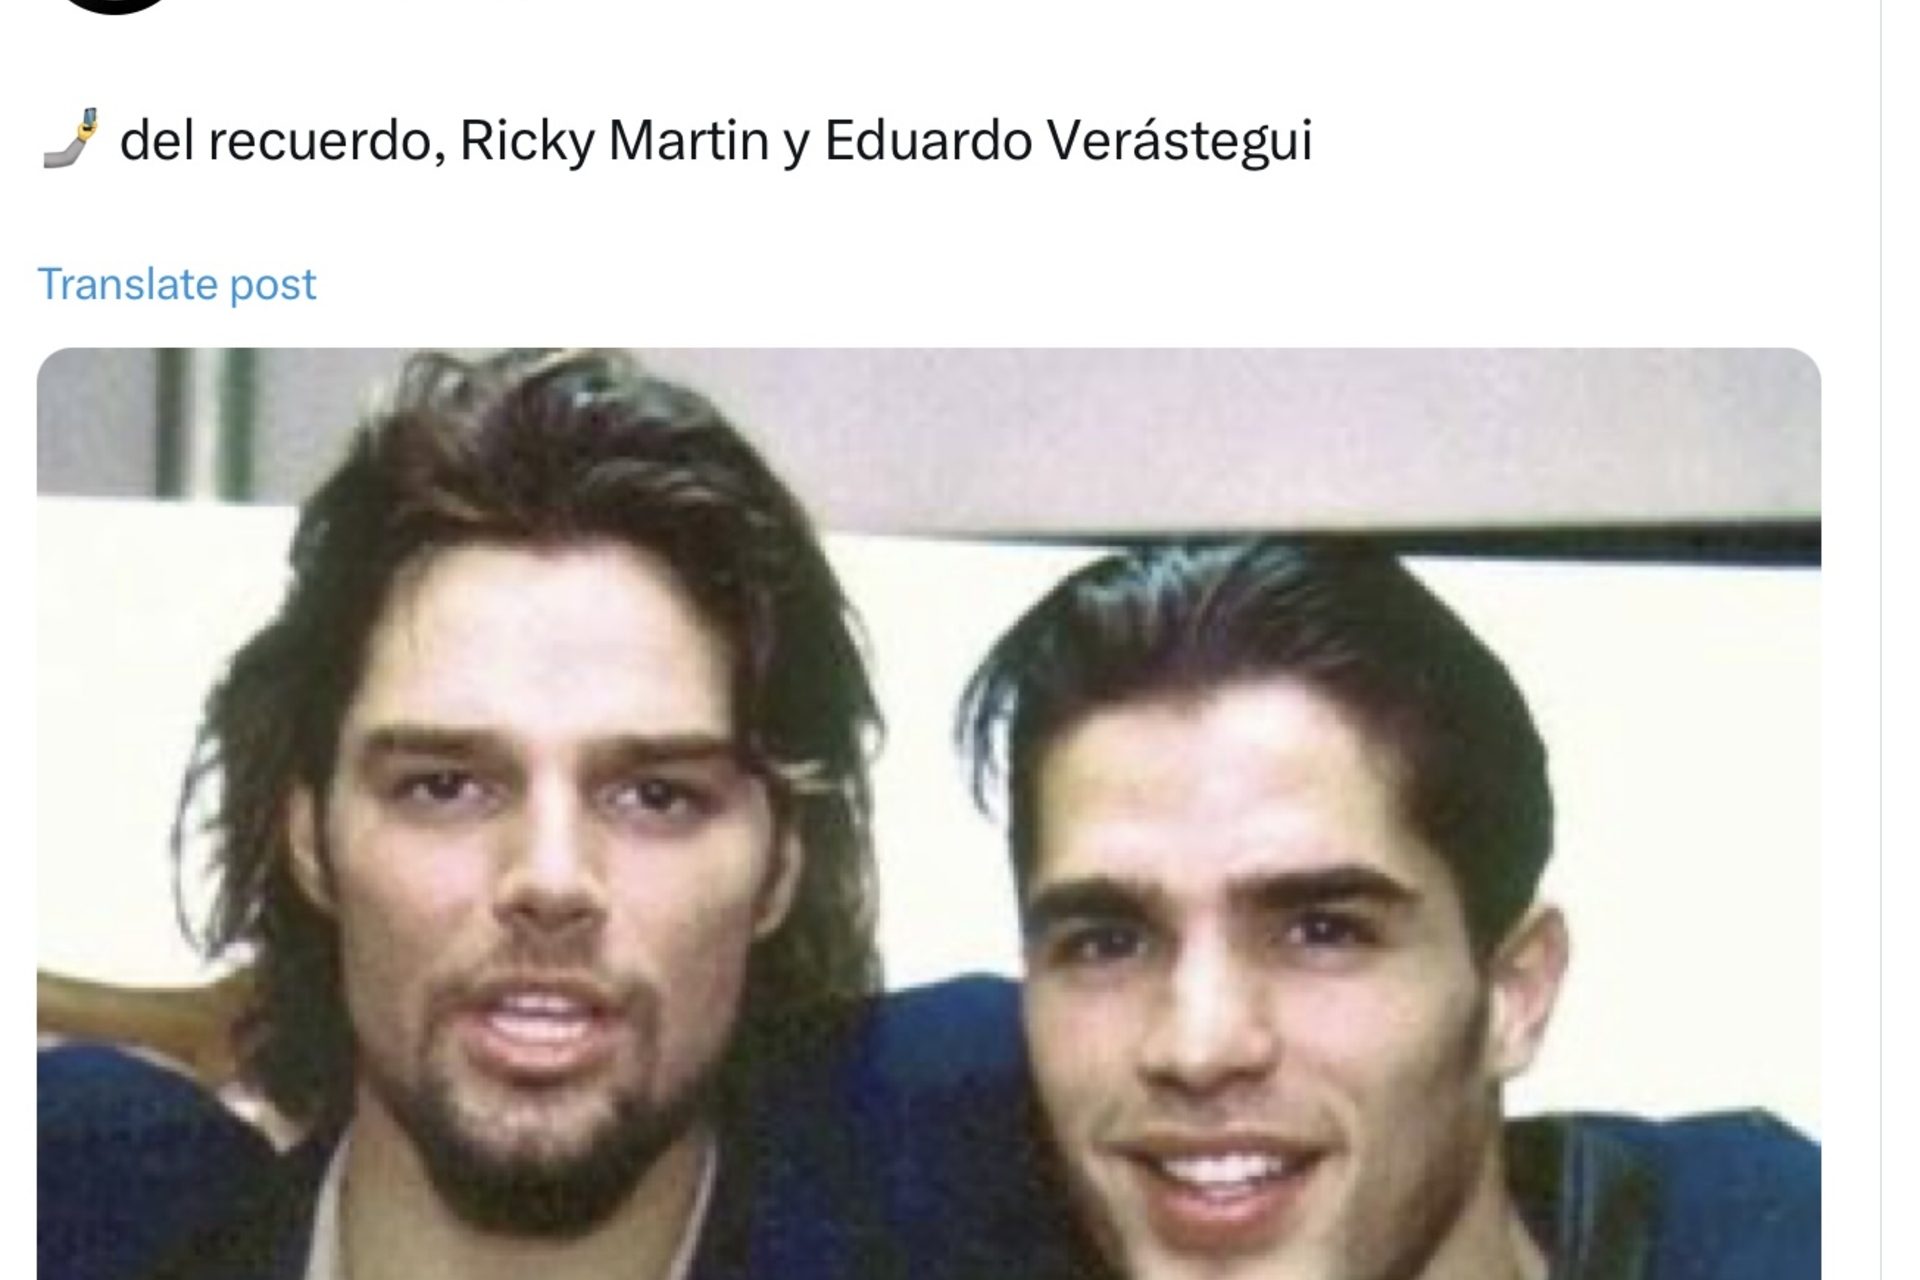 It is rumored that he had a romantic relationship with Ricky Martin 